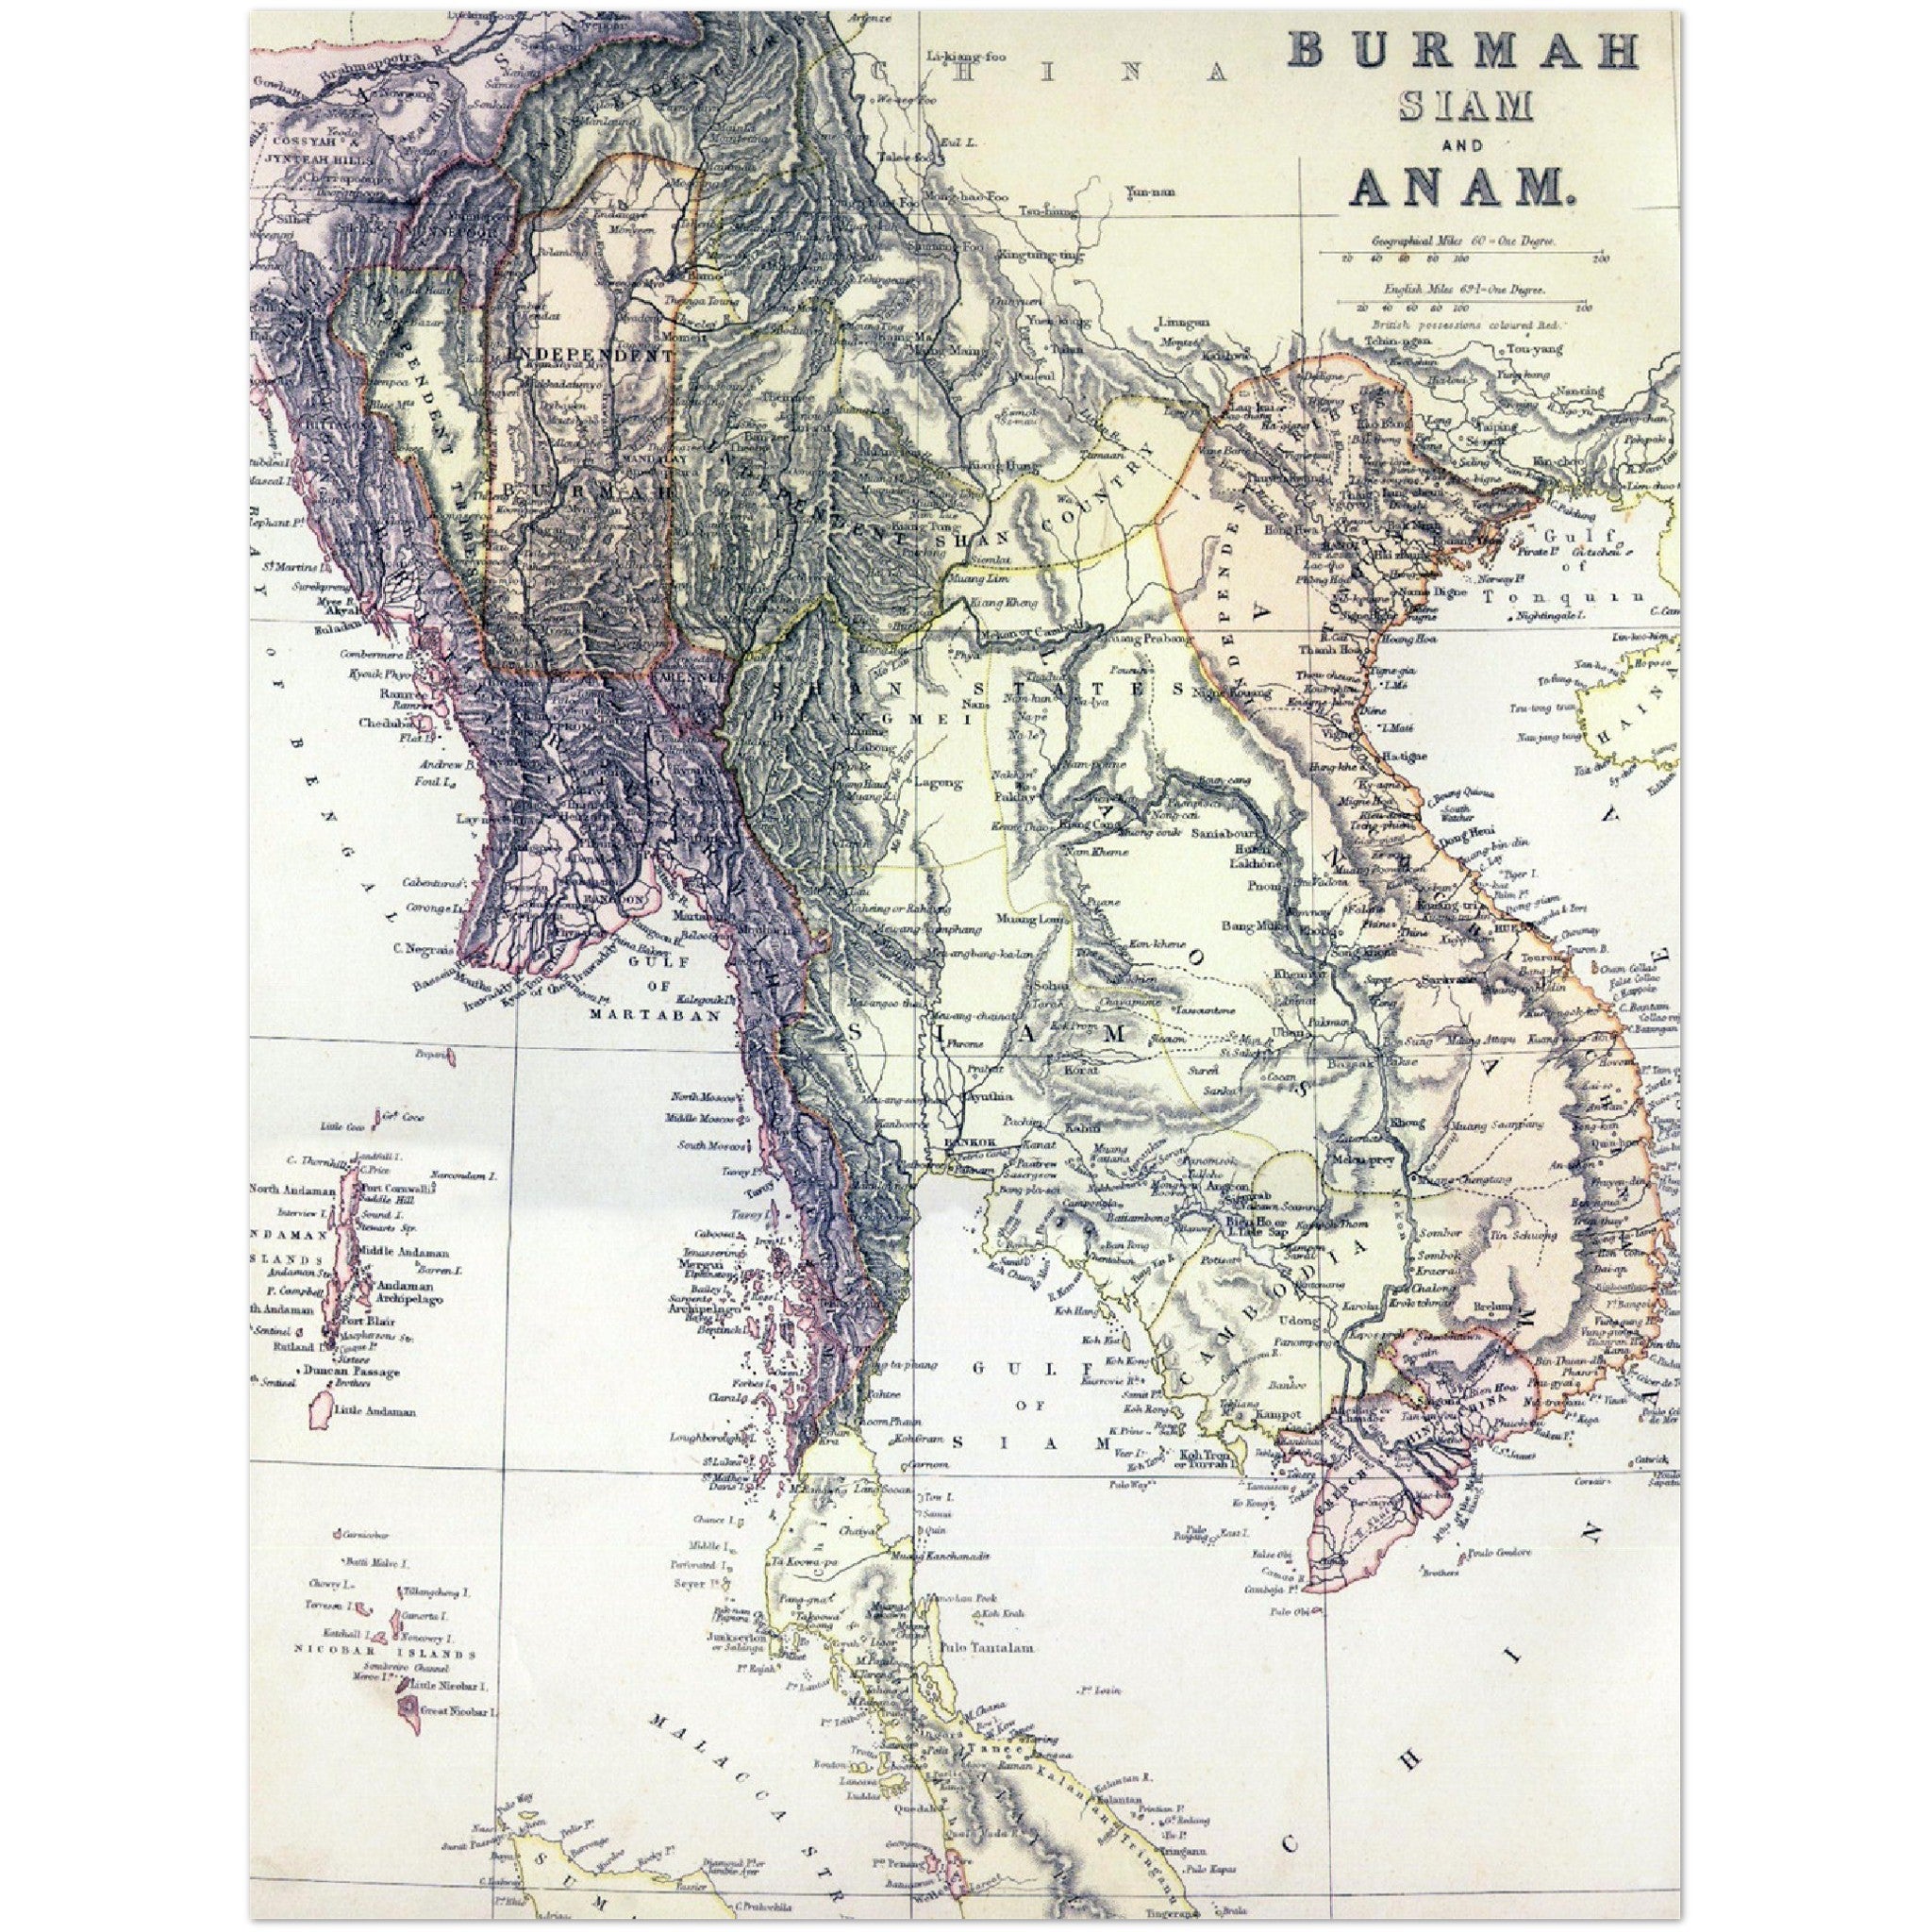 4376252 Burmah, Siam and Anam, map of Greater Indochina 1886